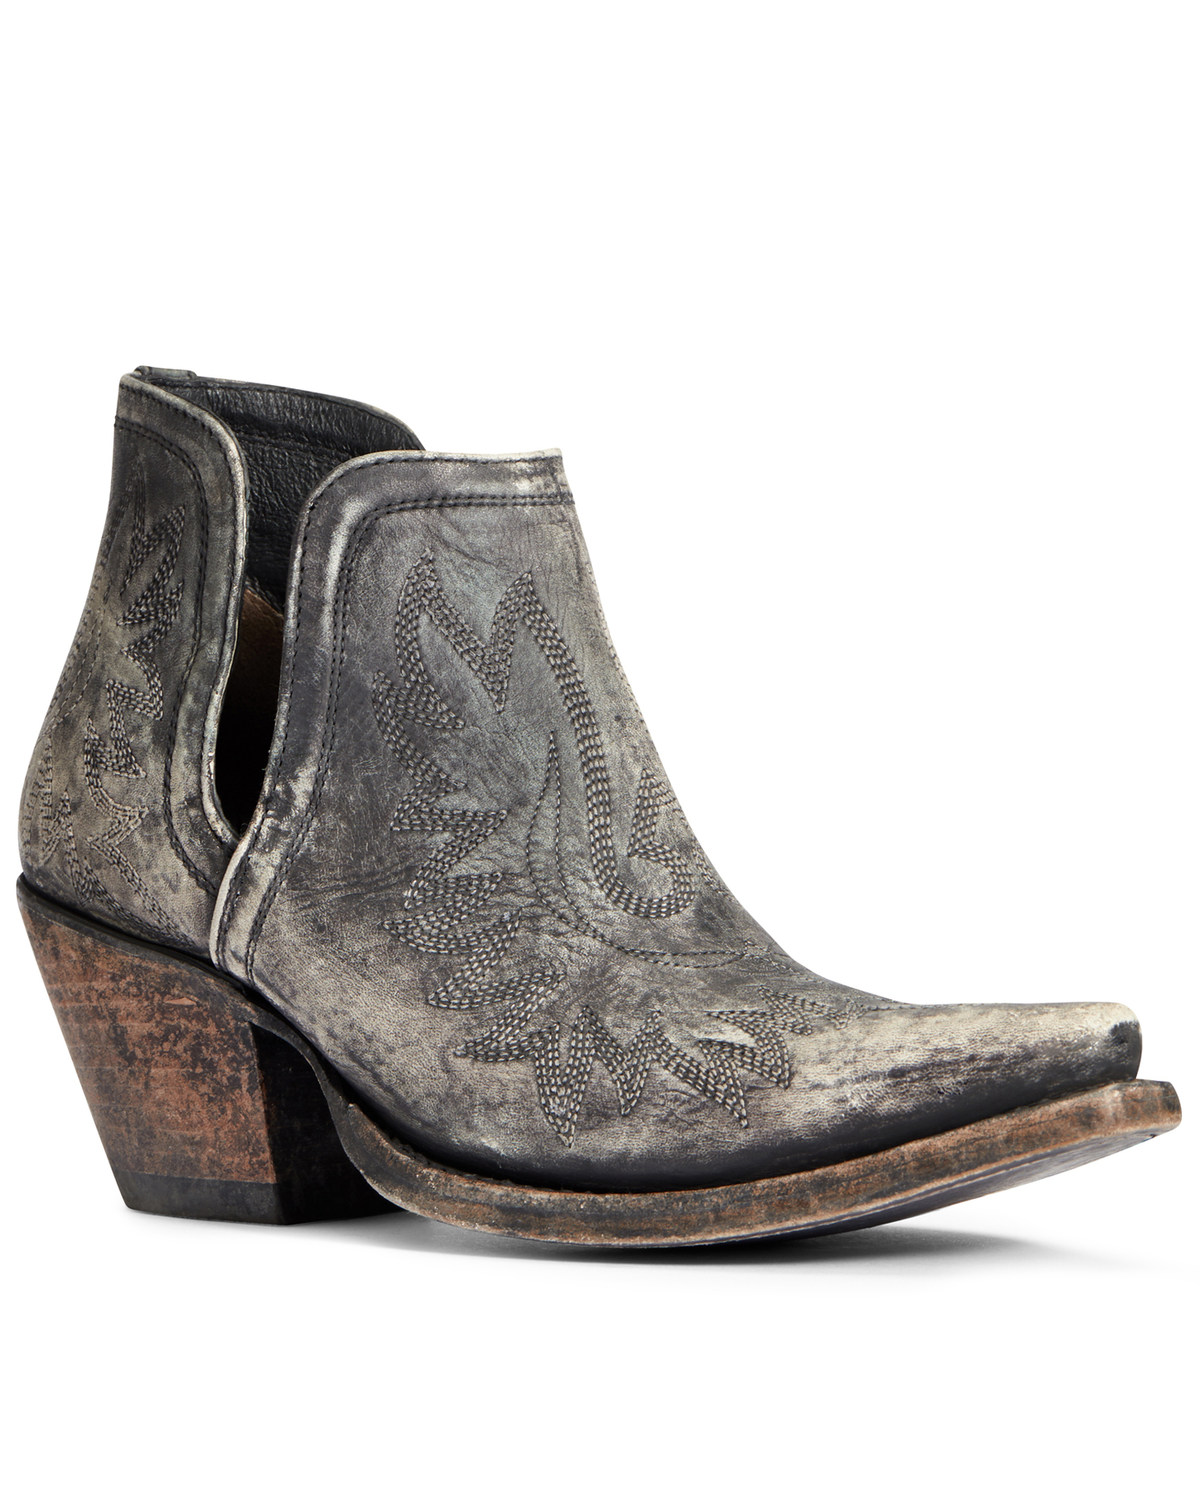 Ariat Women's Dixon Sueded Fashion Booties - Snip Toe | Boot Barn